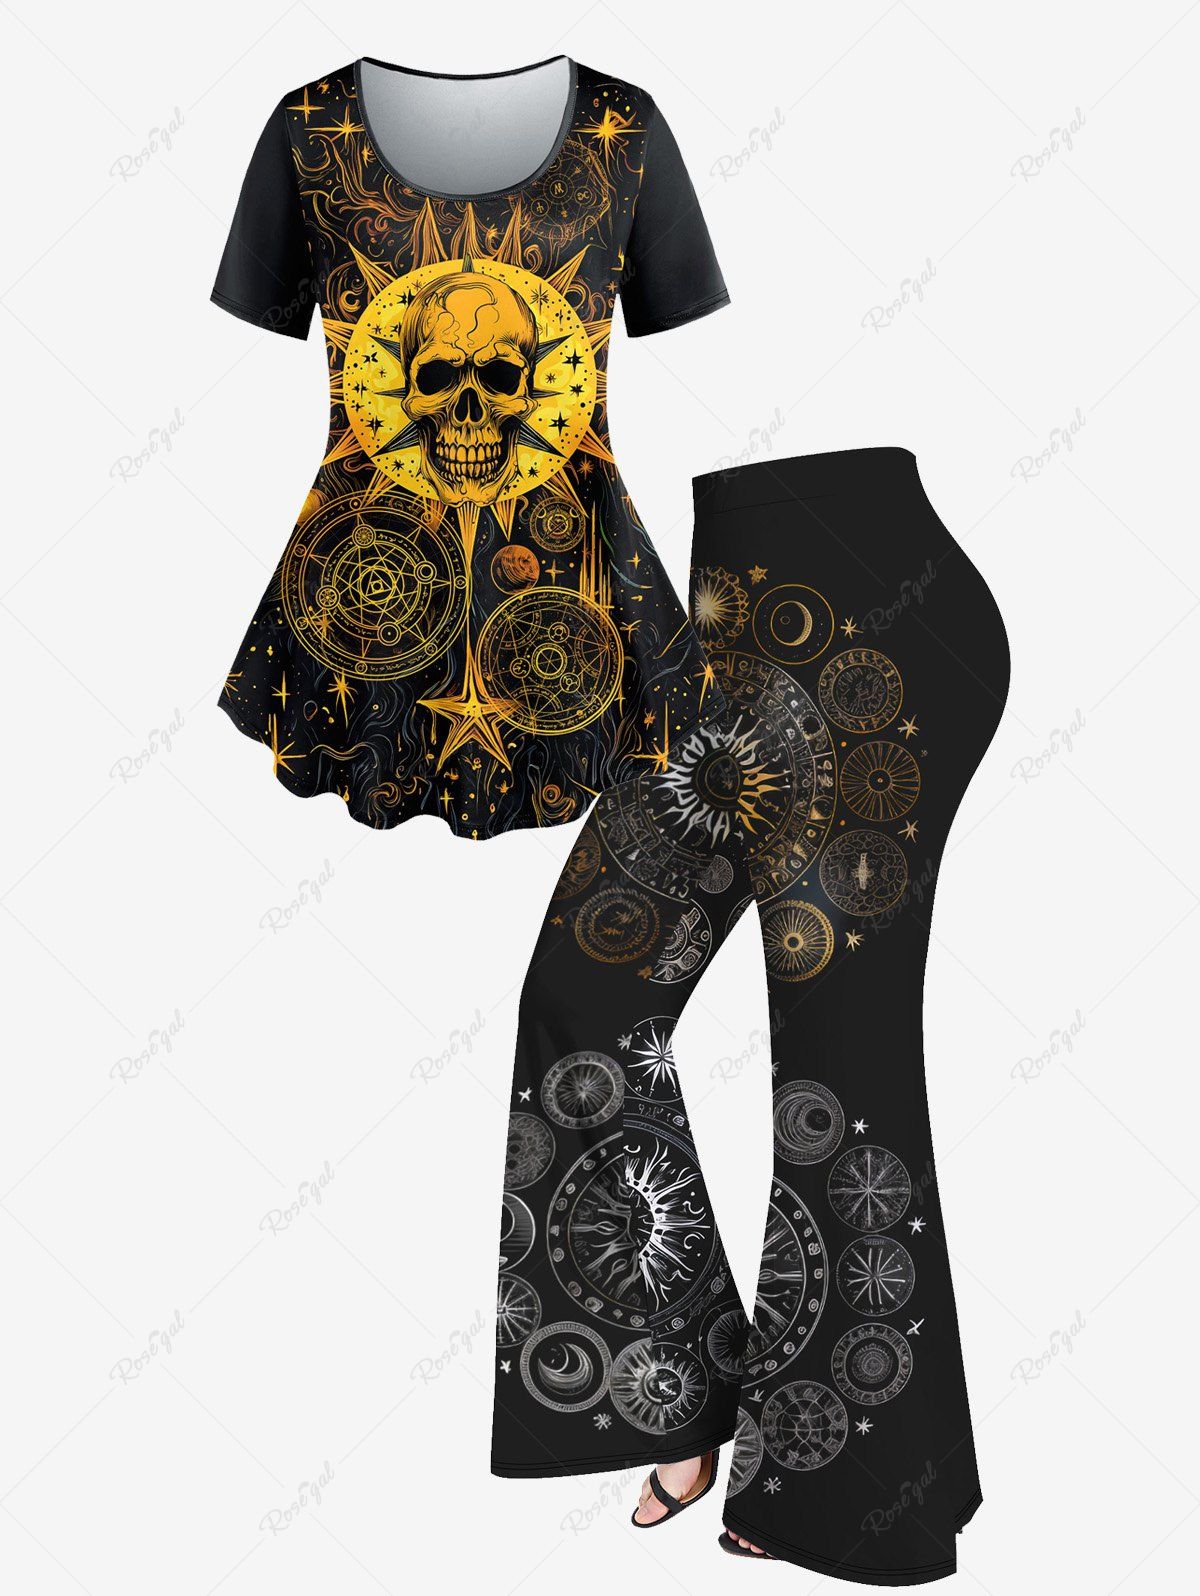 Unique Sun Skull Divination Glitter Print Short Sleeves T-shirt And 3D Sun Moon Star Glitter Print Flare Pants Gothic Outfit  